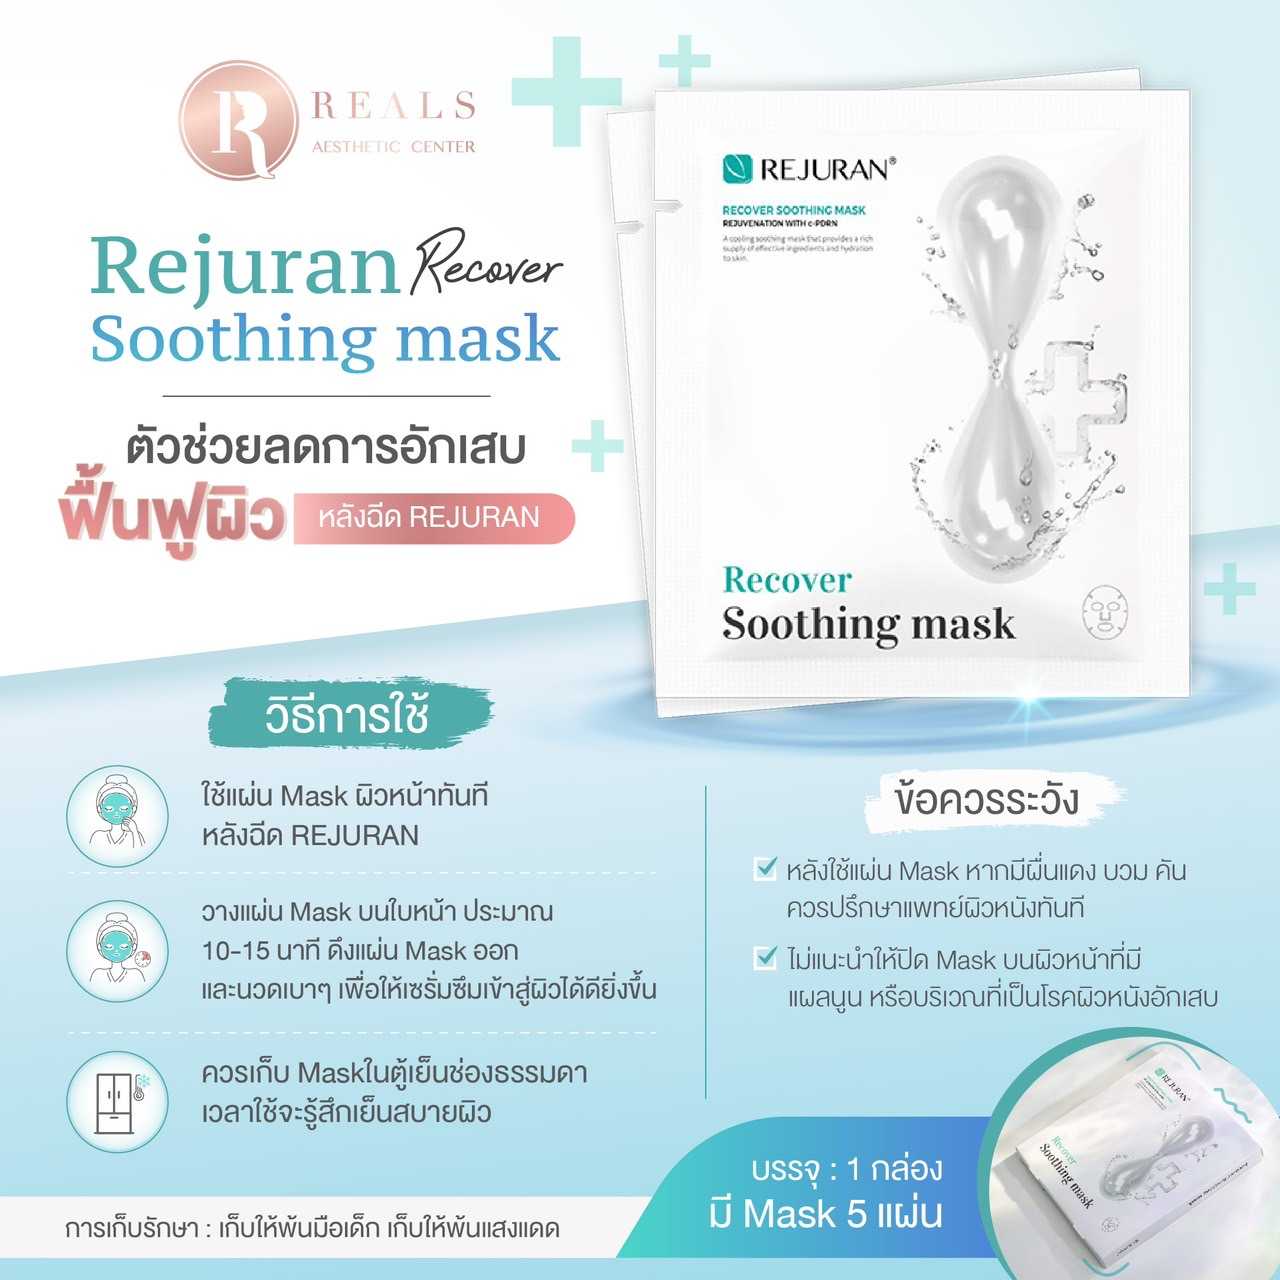 Rejuran recover soothing mask (1 กล่อง บรรจุ 5 แผ่น) | LINE SHOPPING